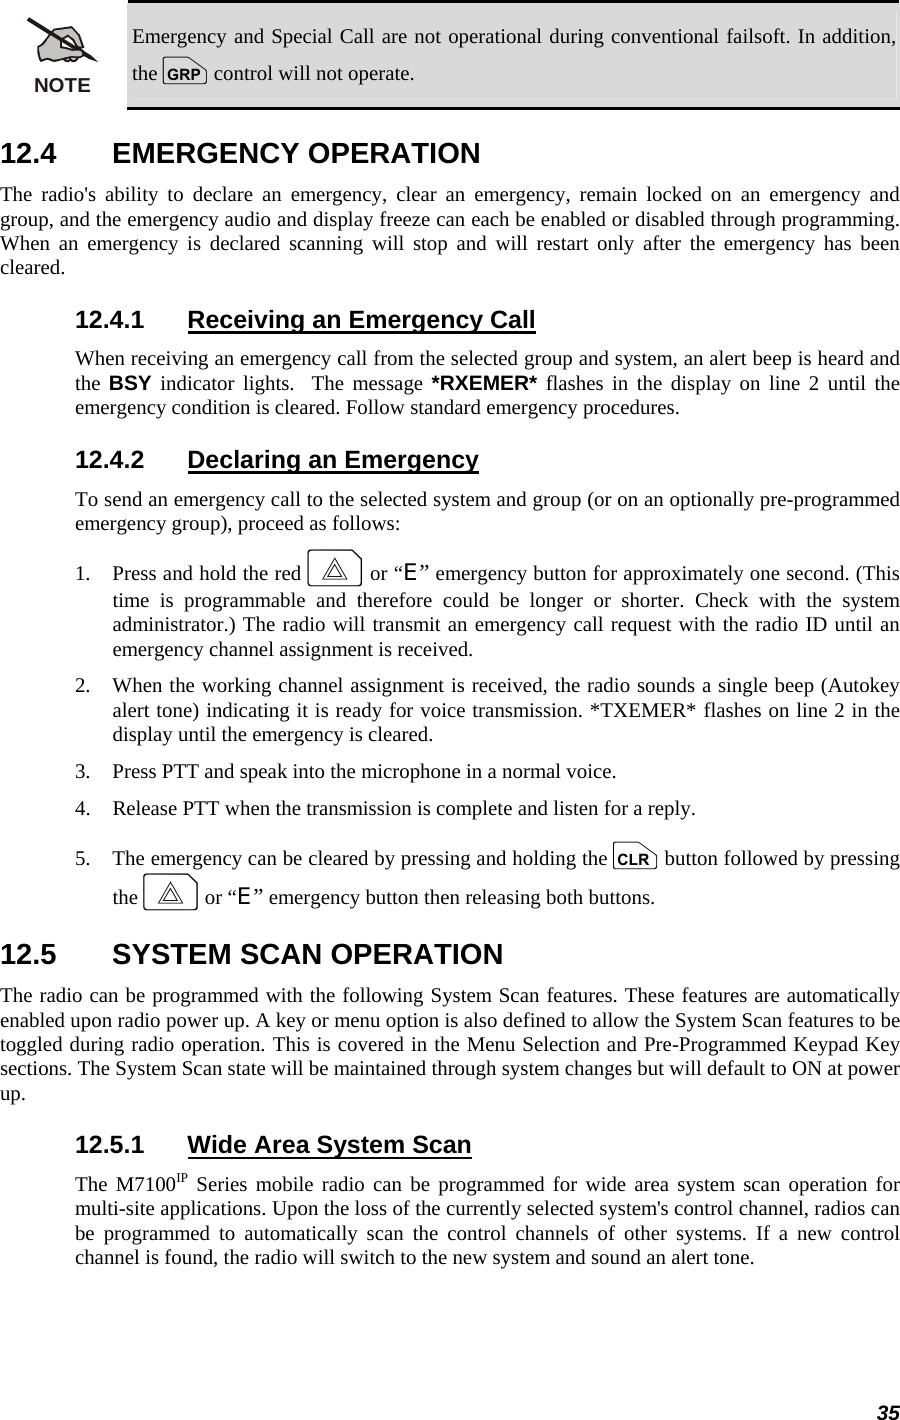 35 NOTE Emergency and Special Call are not operational during conventional failsoft. In addition, the g control will not operate. 12.4 EMERGENCY OPERATION The radio&apos;s ability to declare an emergency, clear an emergency, remain locked on an emergency and group, and the emergency audio and display freeze can each be enabled or disabled through programming. When an emergency is declared scanning will stop and will restart only after the emergency has been cleared. 12.4.1  Receiving an Emergency Call When receiving an emergency call from the selected group and system, an alert beep is heard and the  BSY indicator lights.  The message *RXEMER* flashes in the display on line 2 until the emergency condition is cleared. Follow standard emergency procedures. 12.4.2  Declaring an Emergency To send an emergency call to the selected system and group (or on an optionally pre-programmed emergency group), proceed as follows: 1.   Press and hold the red E or “E” emergency button for approximately one second. (This time is programmable and therefore could be longer or shorter. Check with the system administrator.) The radio will transmit an emergency call request with the radio ID until an emergency channel assignment is received. 2.   When the working channel assignment is received, the radio sounds a single beep (Autokey alert tone) indicating it is ready for voice transmission. *TXEMER* flashes on line 2 in the display until the emergency is cleared. 3.   Press PTT and speak into the microphone in a normal voice. 4.   Release PTT when the transmission is complete and listen for a reply. 5.   The emergency can be cleared by pressing and holding the c button followed by pressing the E or “E” emergency button then releasing both buttons. 12.5  SYSTEM SCAN OPERATION The radio can be programmed with the following System Scan features. These features are automatically enabled upon radio power up. A key or menu option is also defined to allow the System Scan features to be toggled during radio operation. This is covered in the Menu Selection and Pre-Programmed Keypad Key sections. The System Scan state will be maintained through system changes but will default to ON at power up. 12.5.1  Wide Area System Scan The M7100IP Series mobile radio can be programmed for wide area system scan operation for multi-site applications. Upon the loss of the currently selected system&apos;s control channel, radios can be programmed to automatically scan the control channels of other systems. If a new control channel is found, the radio will switch to the new system and sound an alert tone. 